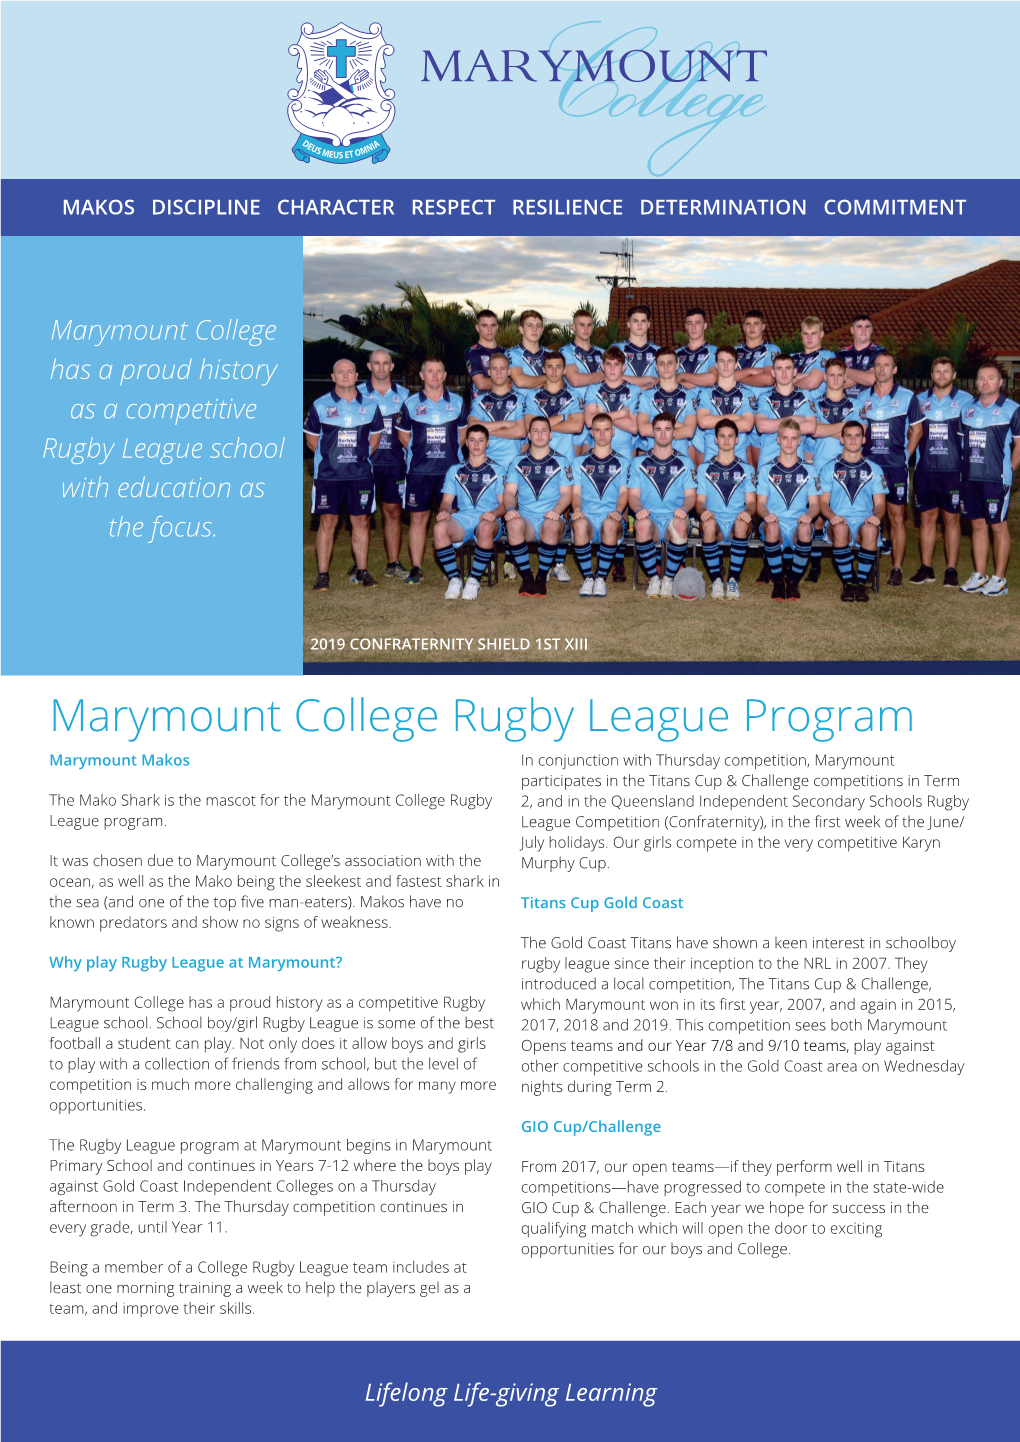 Marymount College Rugby League Program